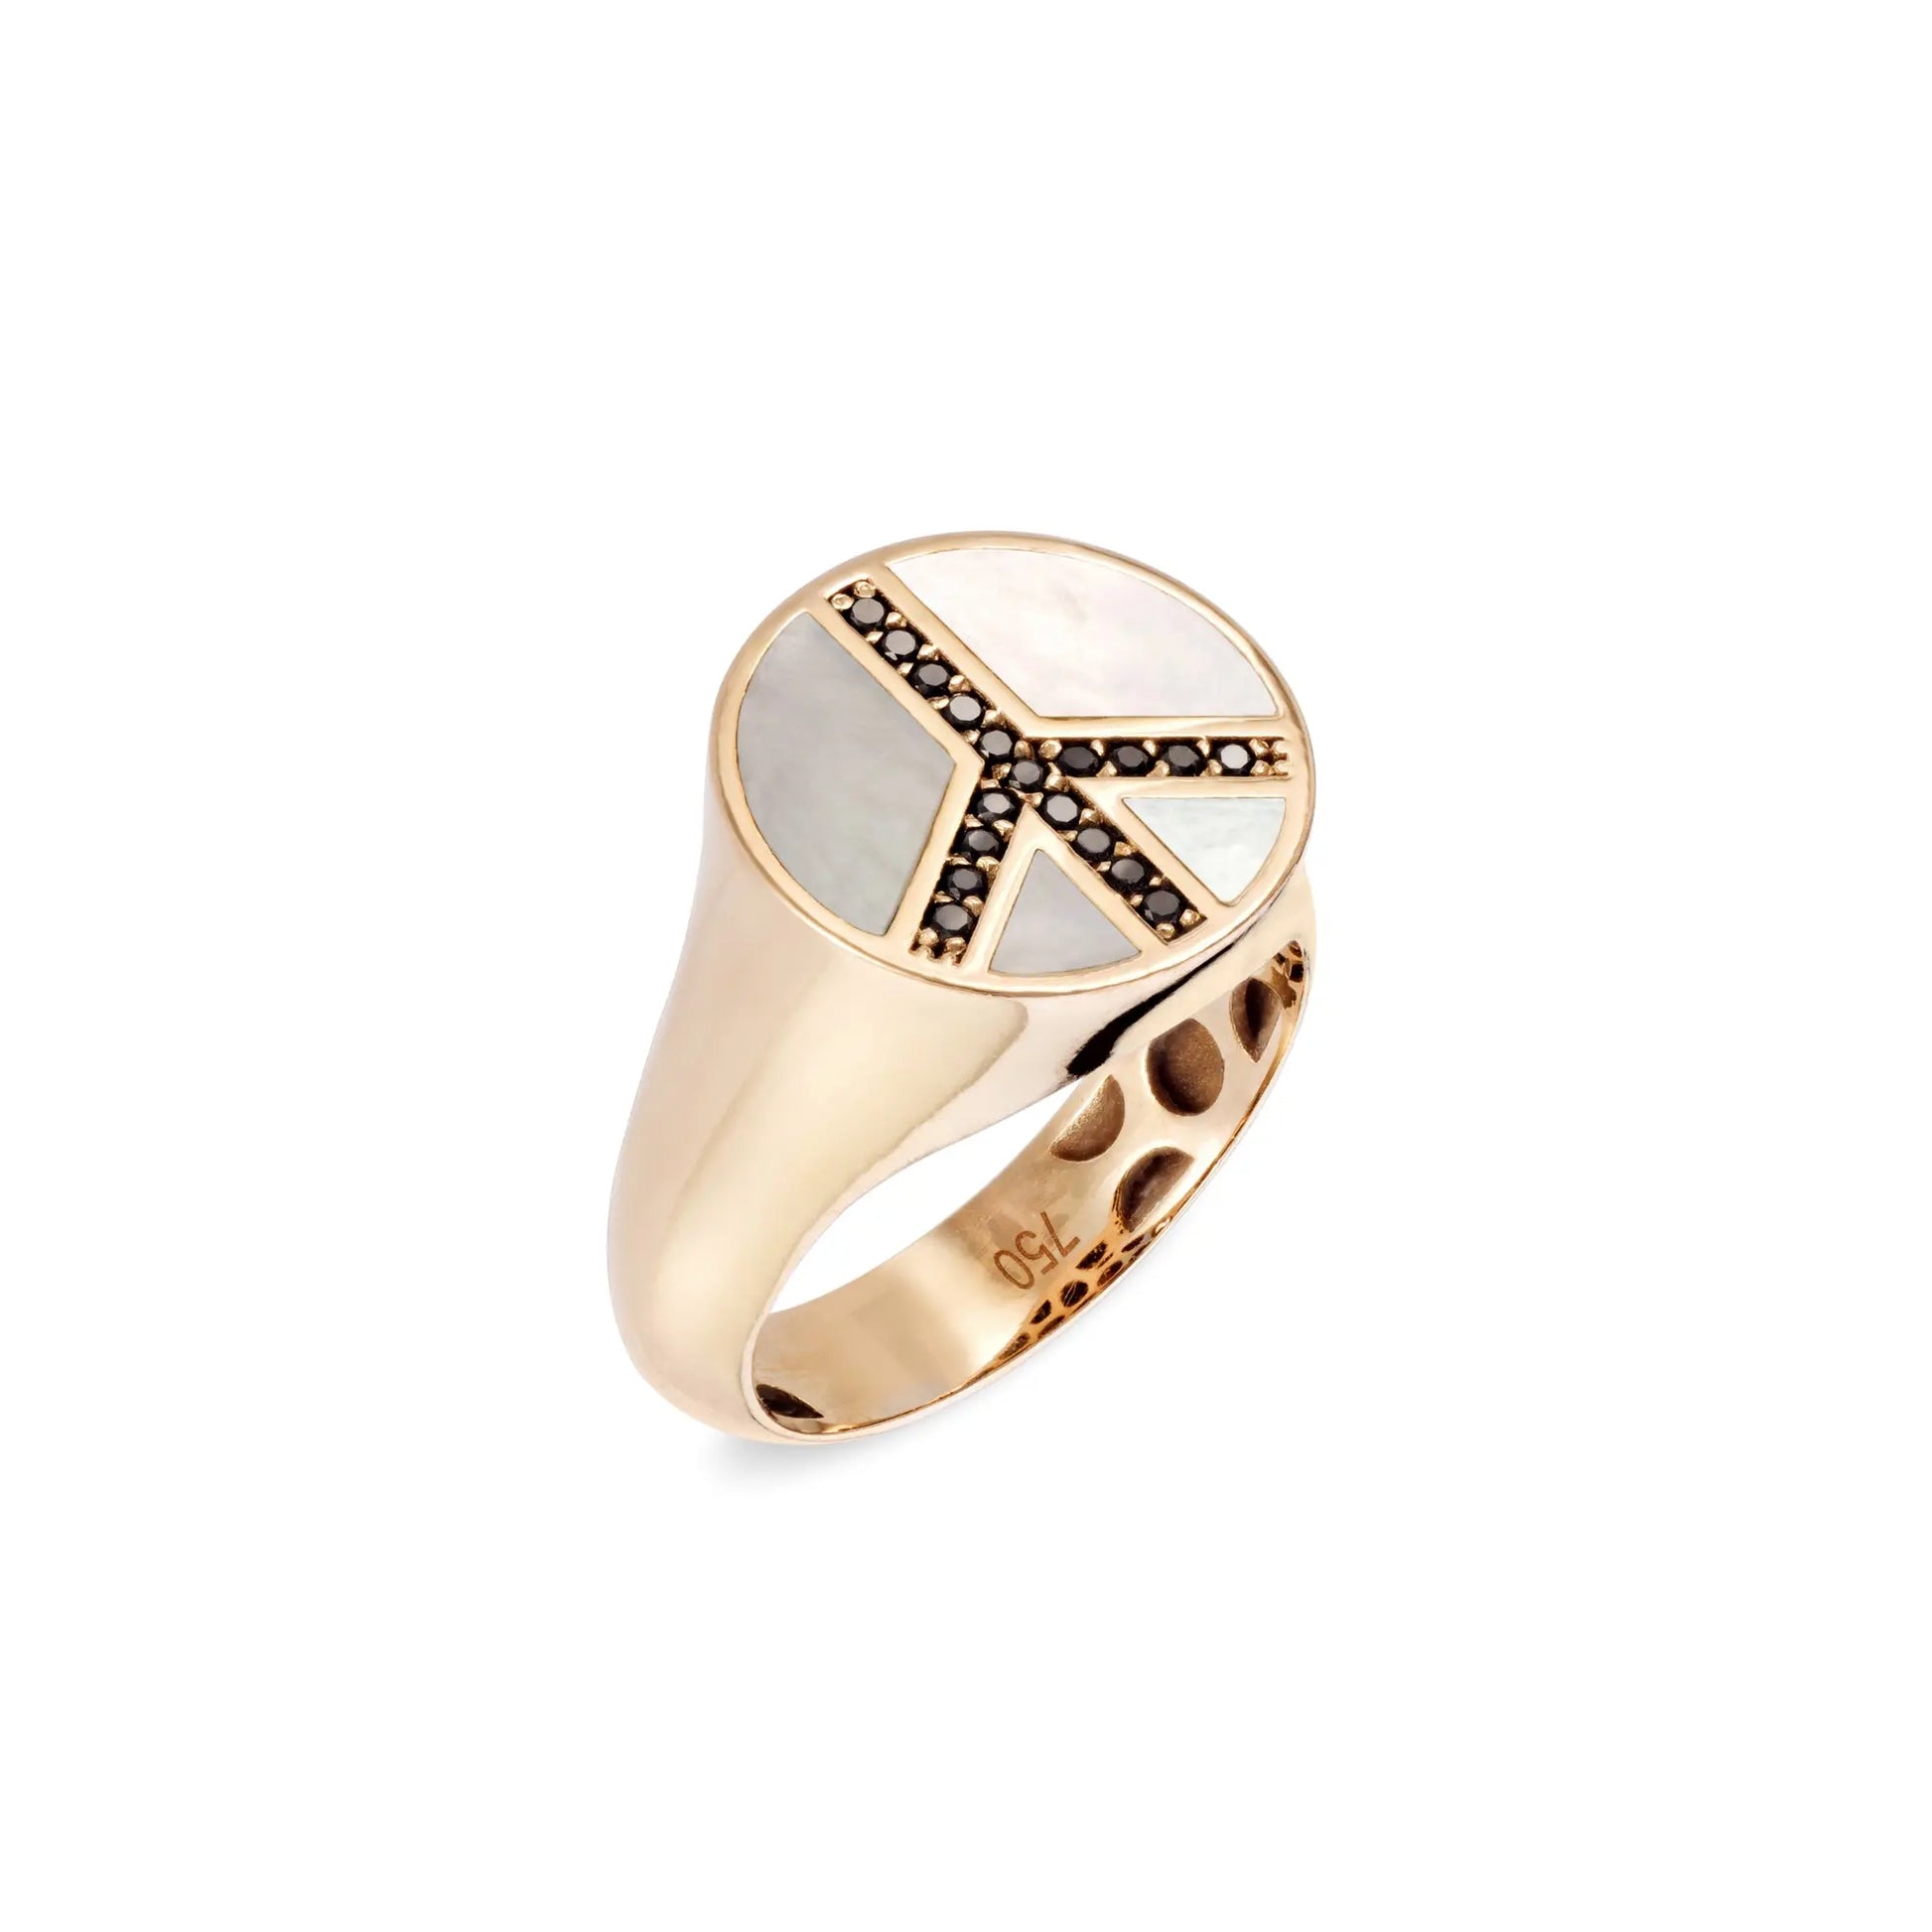 Peace Ring - with black or white diamonds Lunaflolondon